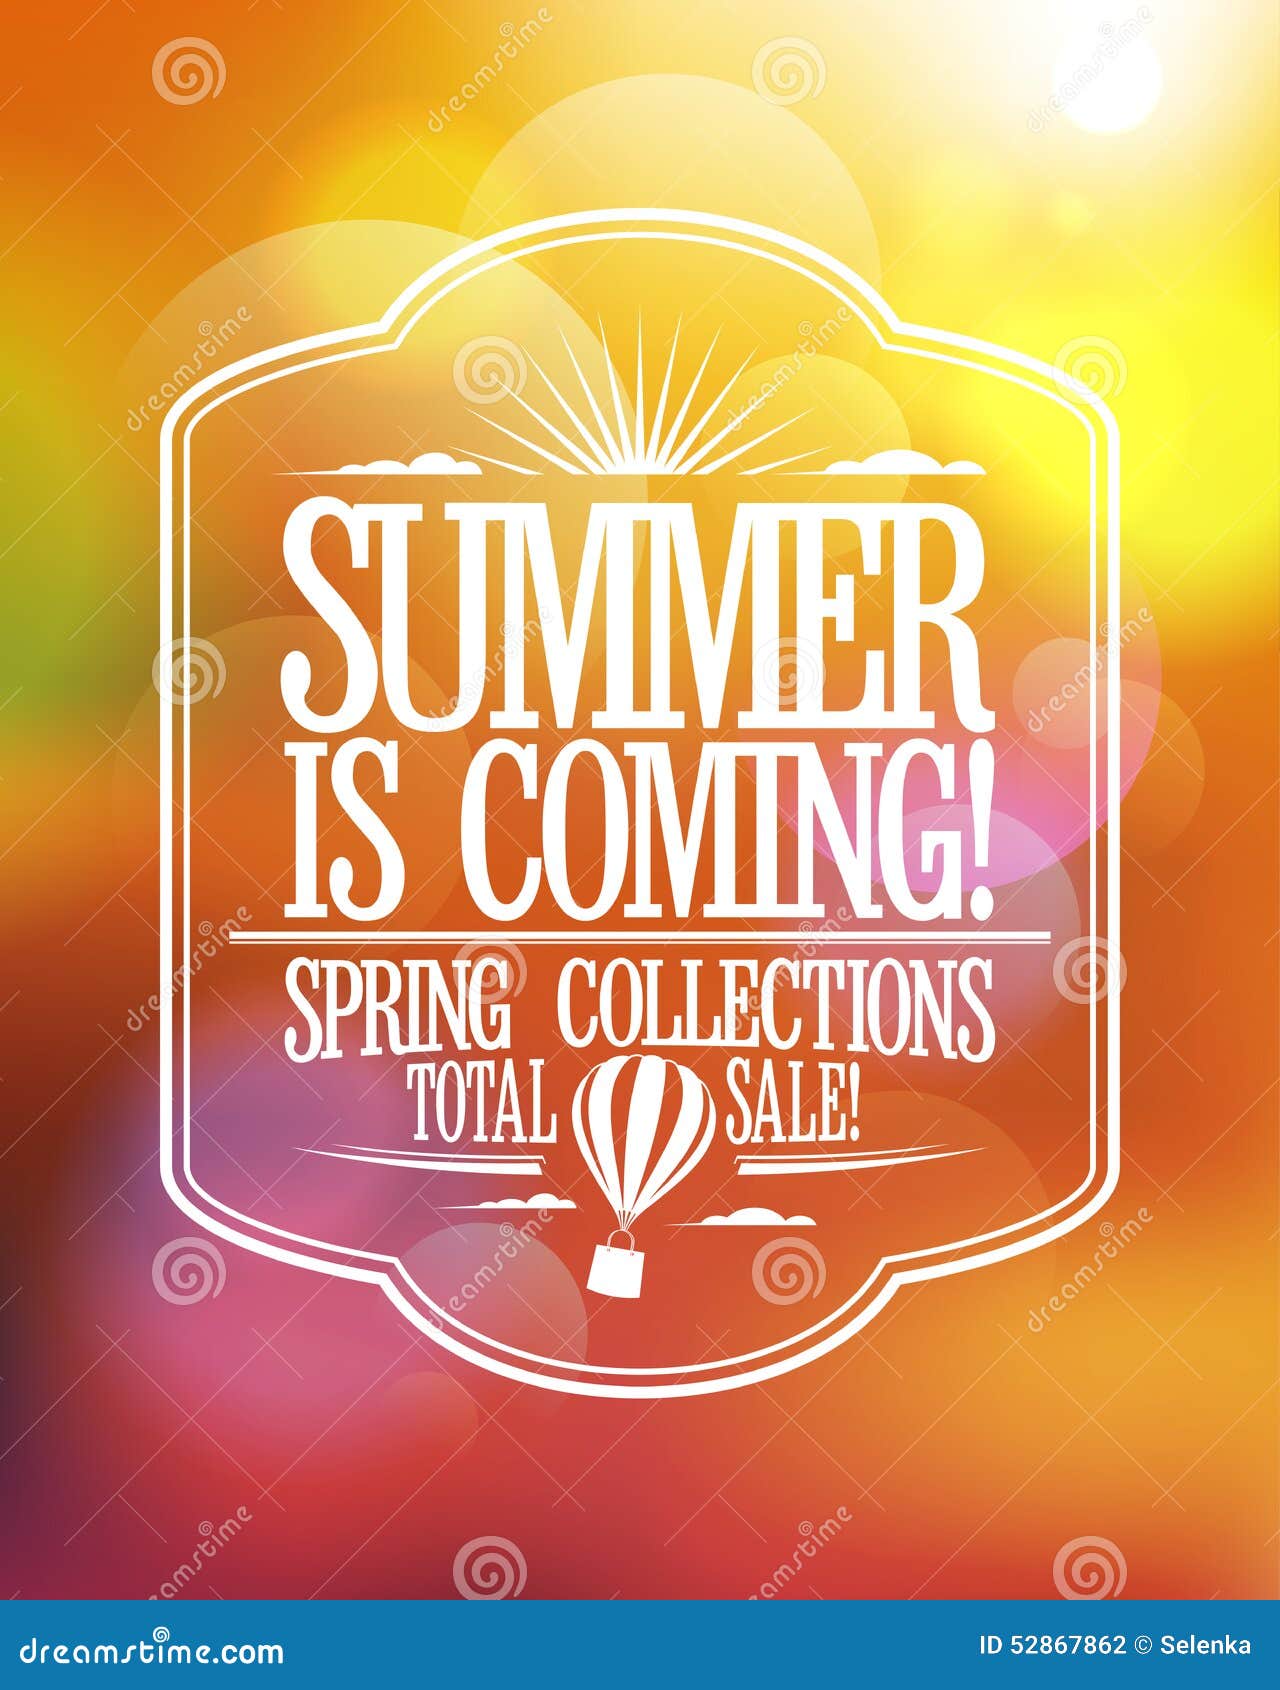 Summer Is Coming, Spring Collections Total Sale Design 